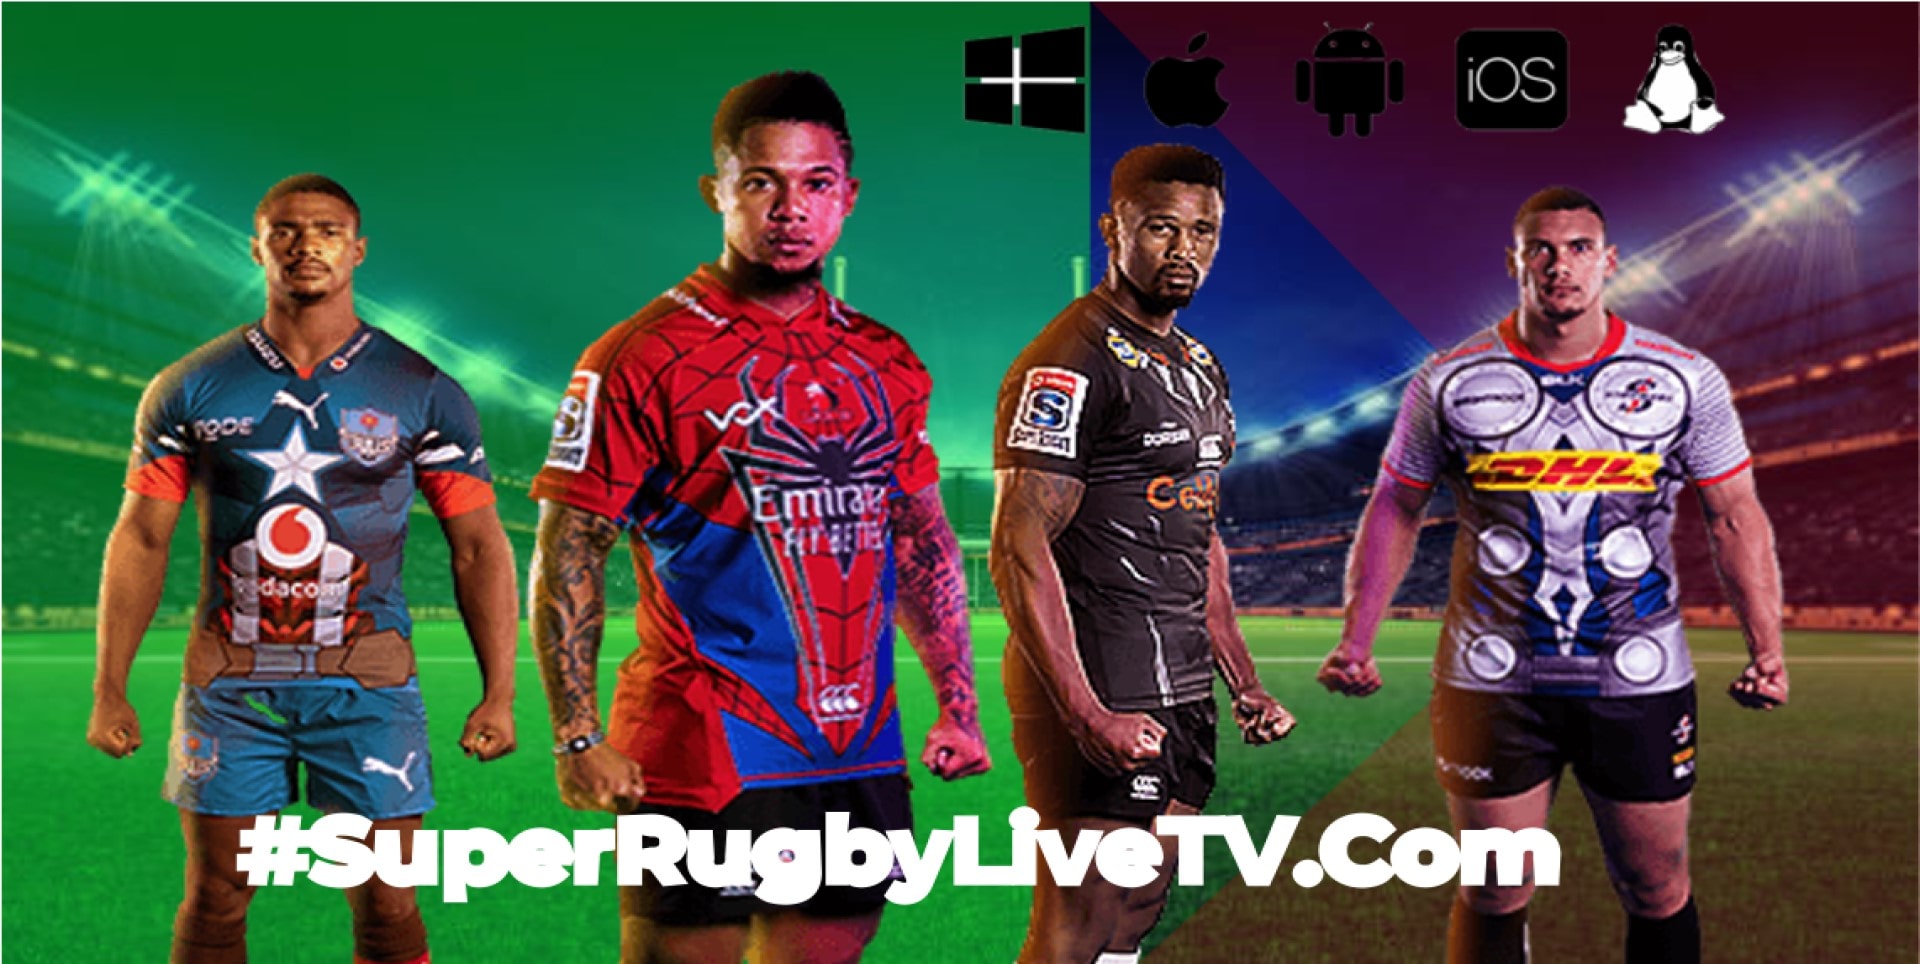 Super Rugby Live Stream 2022 | How To Watch Super Rugby Pacific Full Match Replay slider